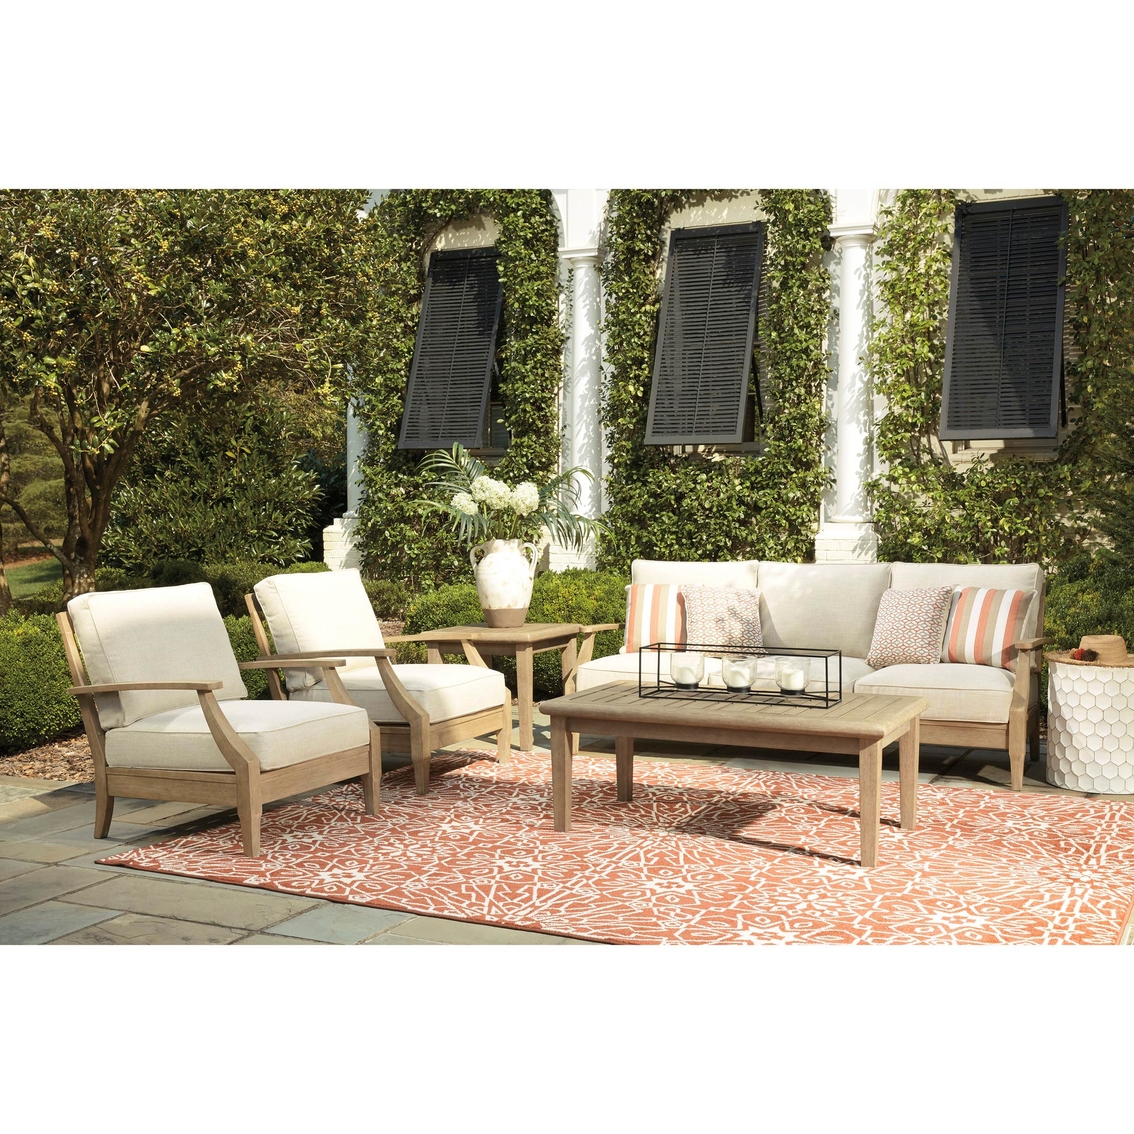 Signature Design by Ashley Clare View 5 pc. Outdoor Sofa Set - Image 2 of 8